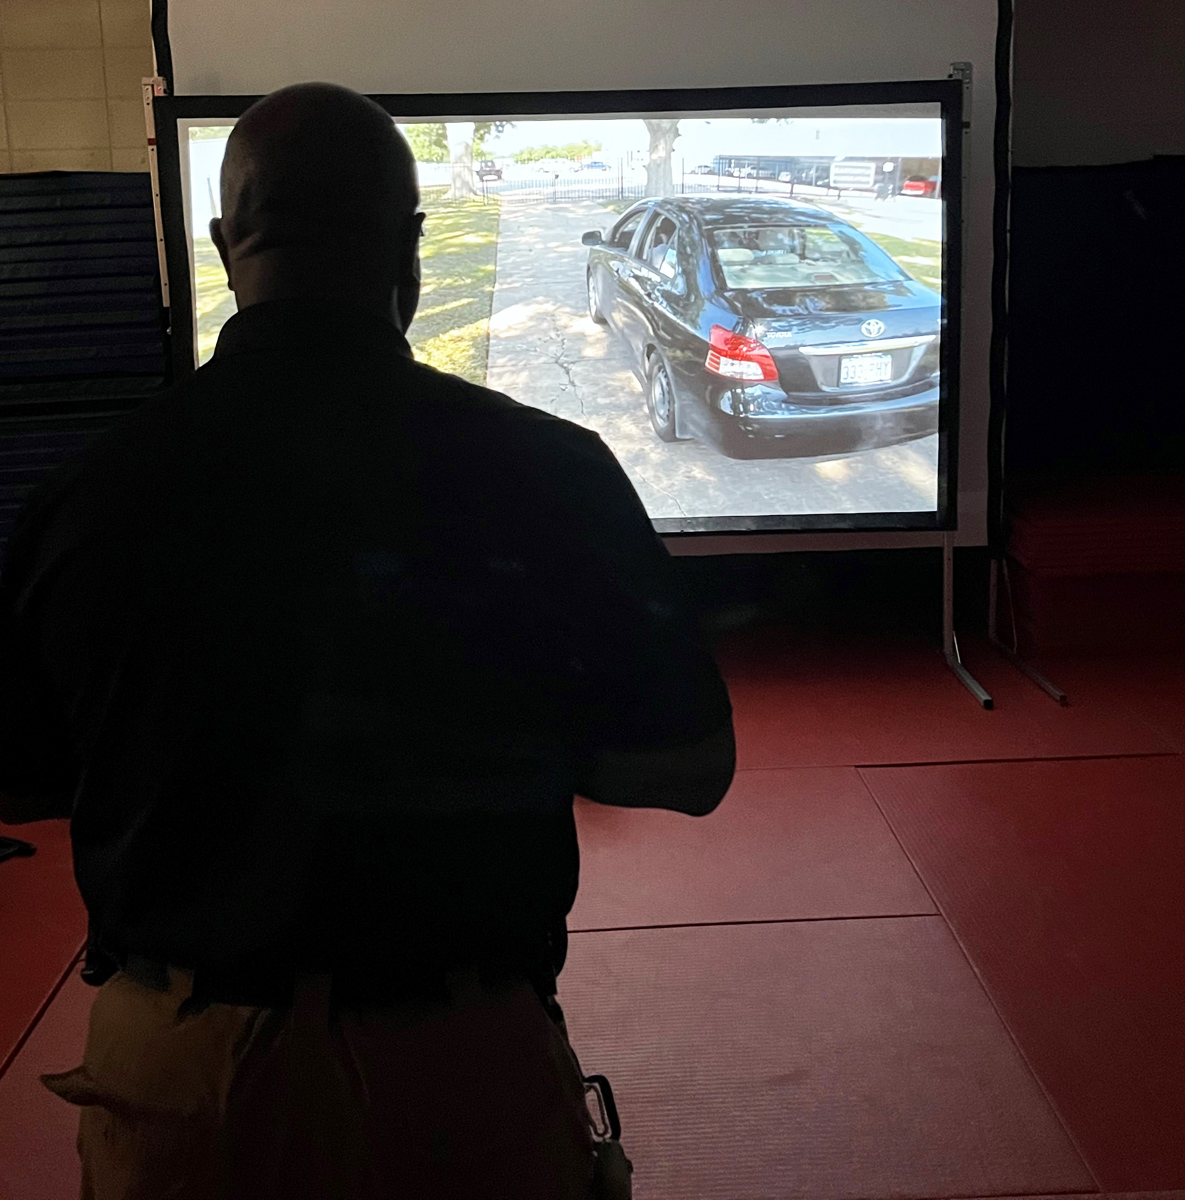 South Georgia Technical College utilizes cutting edge technology to produce realistic scenario-based engagements and exercises to assist LEA cadets in making the correct split-second decisions while maintaining public safety and effectively de-escalating dangerous situations.